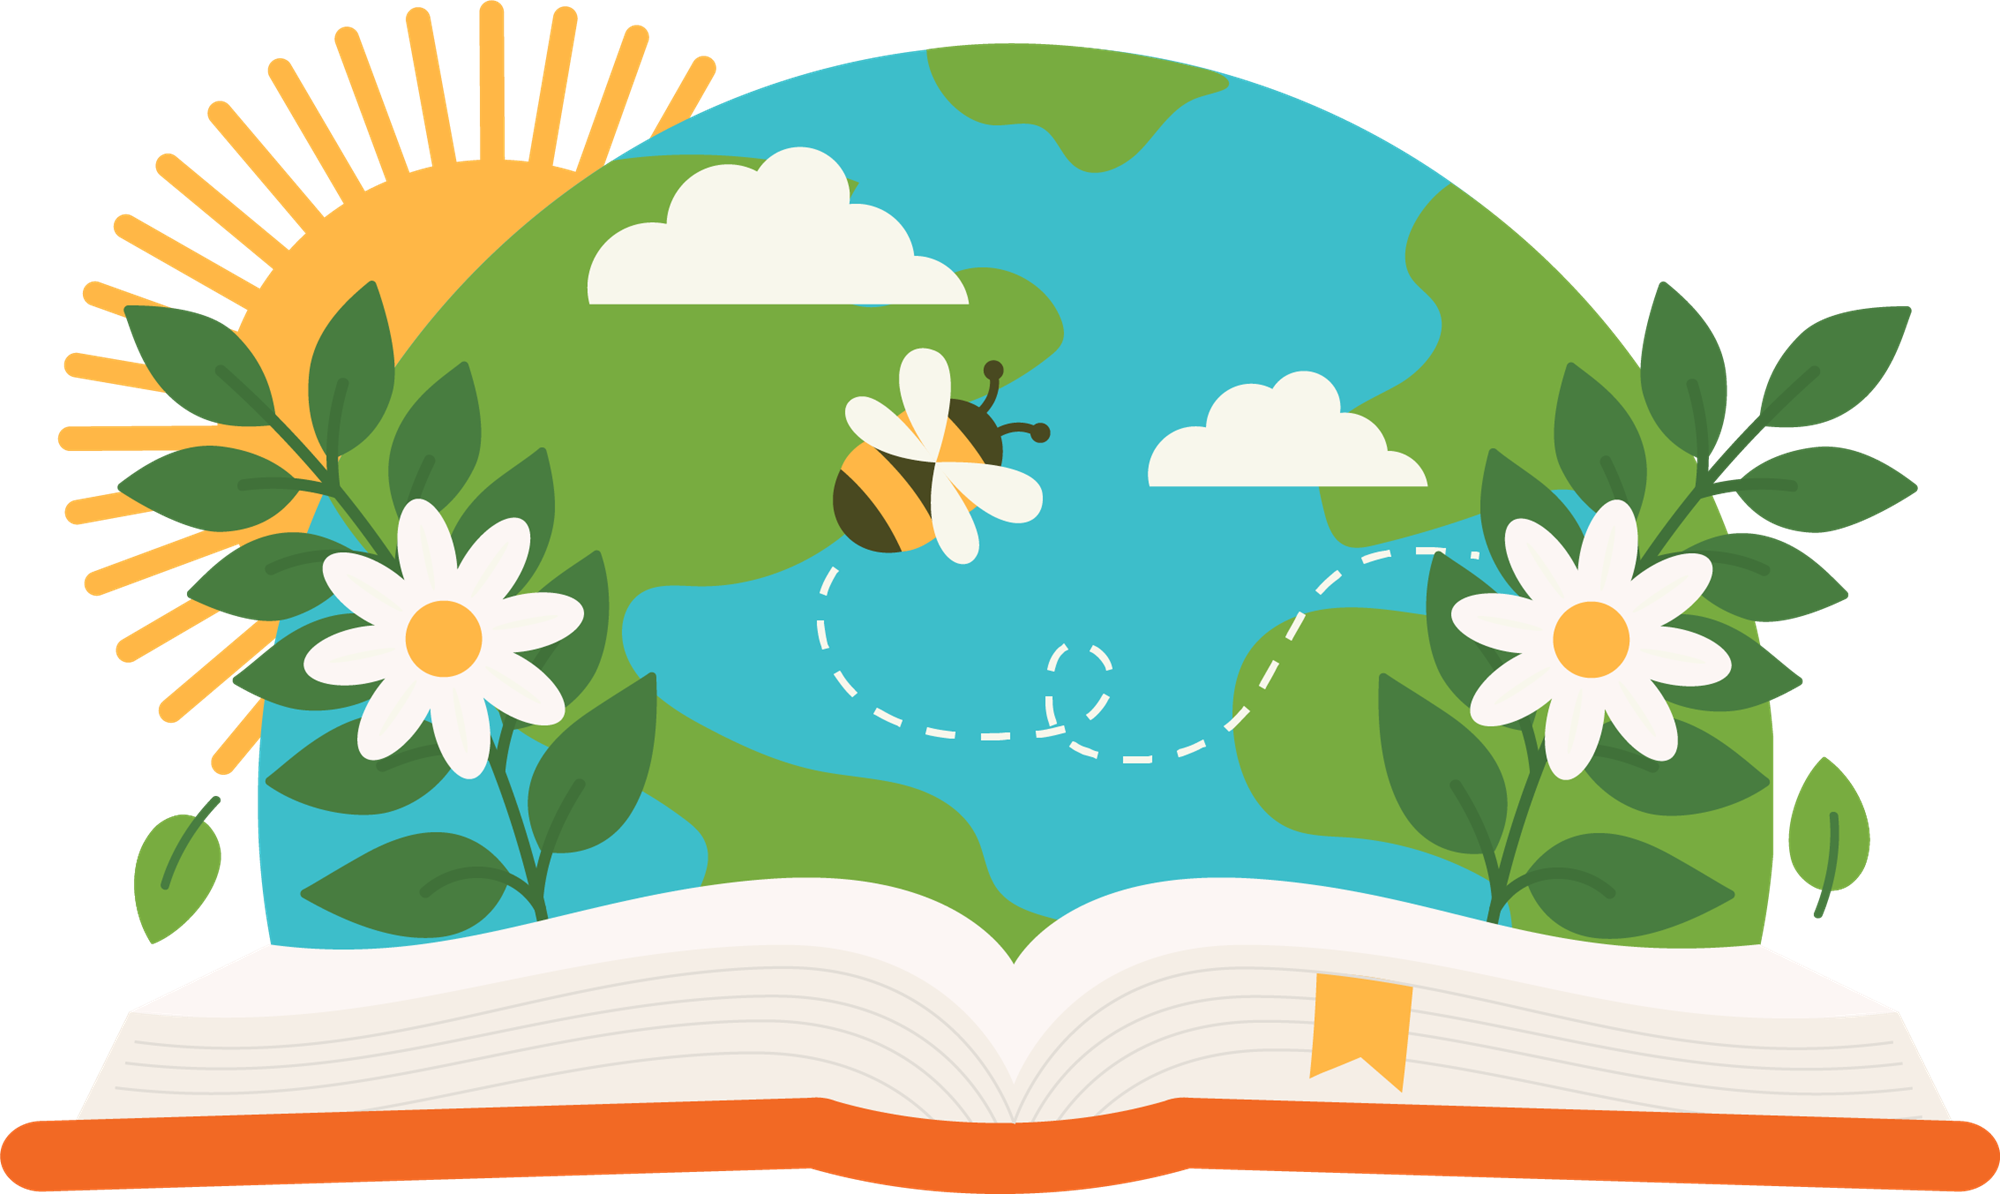 A book is lying open flat with an image of the Earth coming out of the book. Two white flowers and a bee are in front of Earth and the Sun is peeking out from behind.